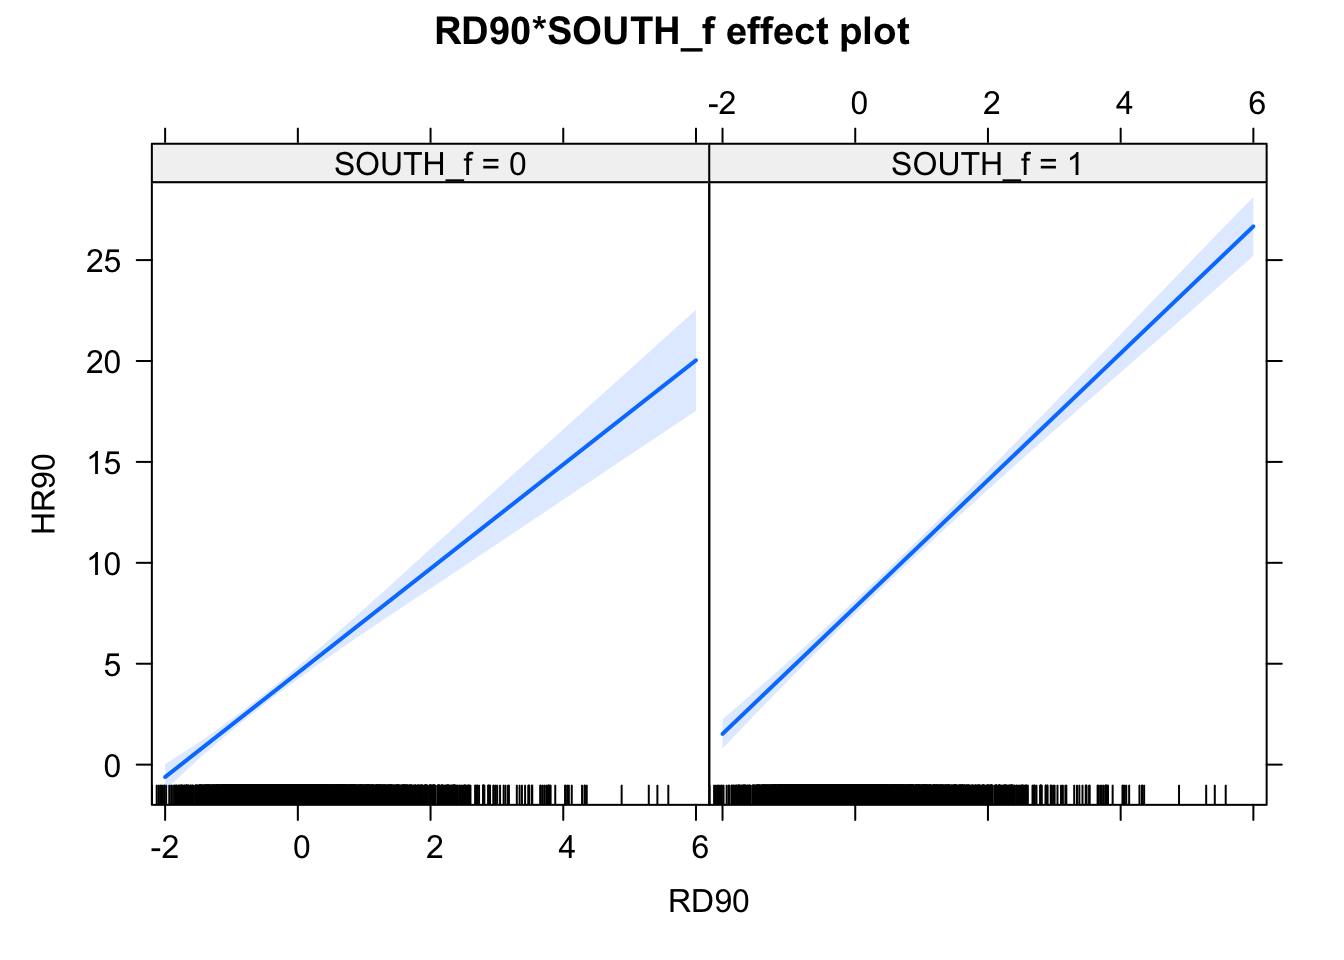 Two plots side by side, with the same axes, but one with the title 'South f equals zero', and one with 'South f equals one'. The vertical axis, labeled 'HR90', ranges from zero to thirty, while the horizontal axis, labeled 'RD90', ranges from negative two to six. A blue line appears in each of the two plots, with a light blue shaded area growing around them as you move away from the zero value on the horizontal axis. The second plot, with 'South f equals one', has a blue line with a steeper slope, and the light blue covers a smaller area.